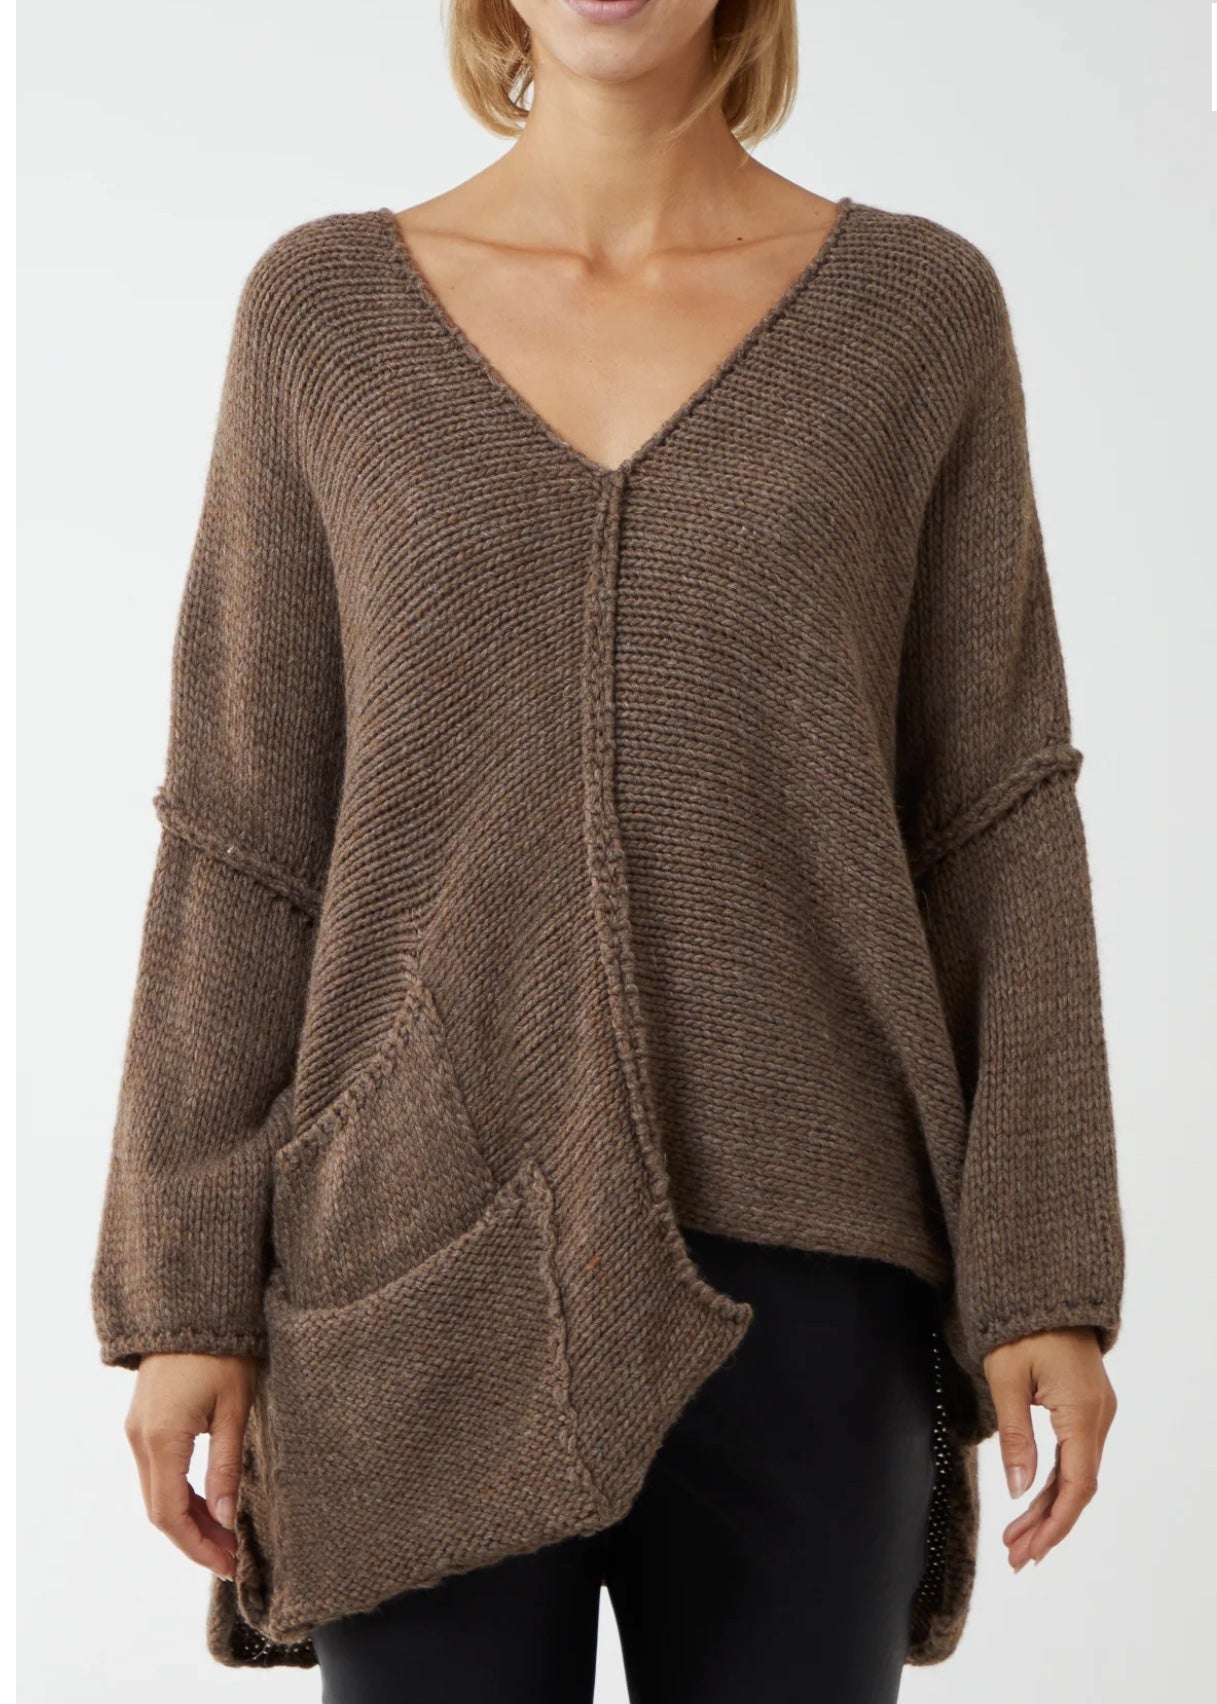 Sands - Asymmetric Exposed Seams Knit / Chocolate